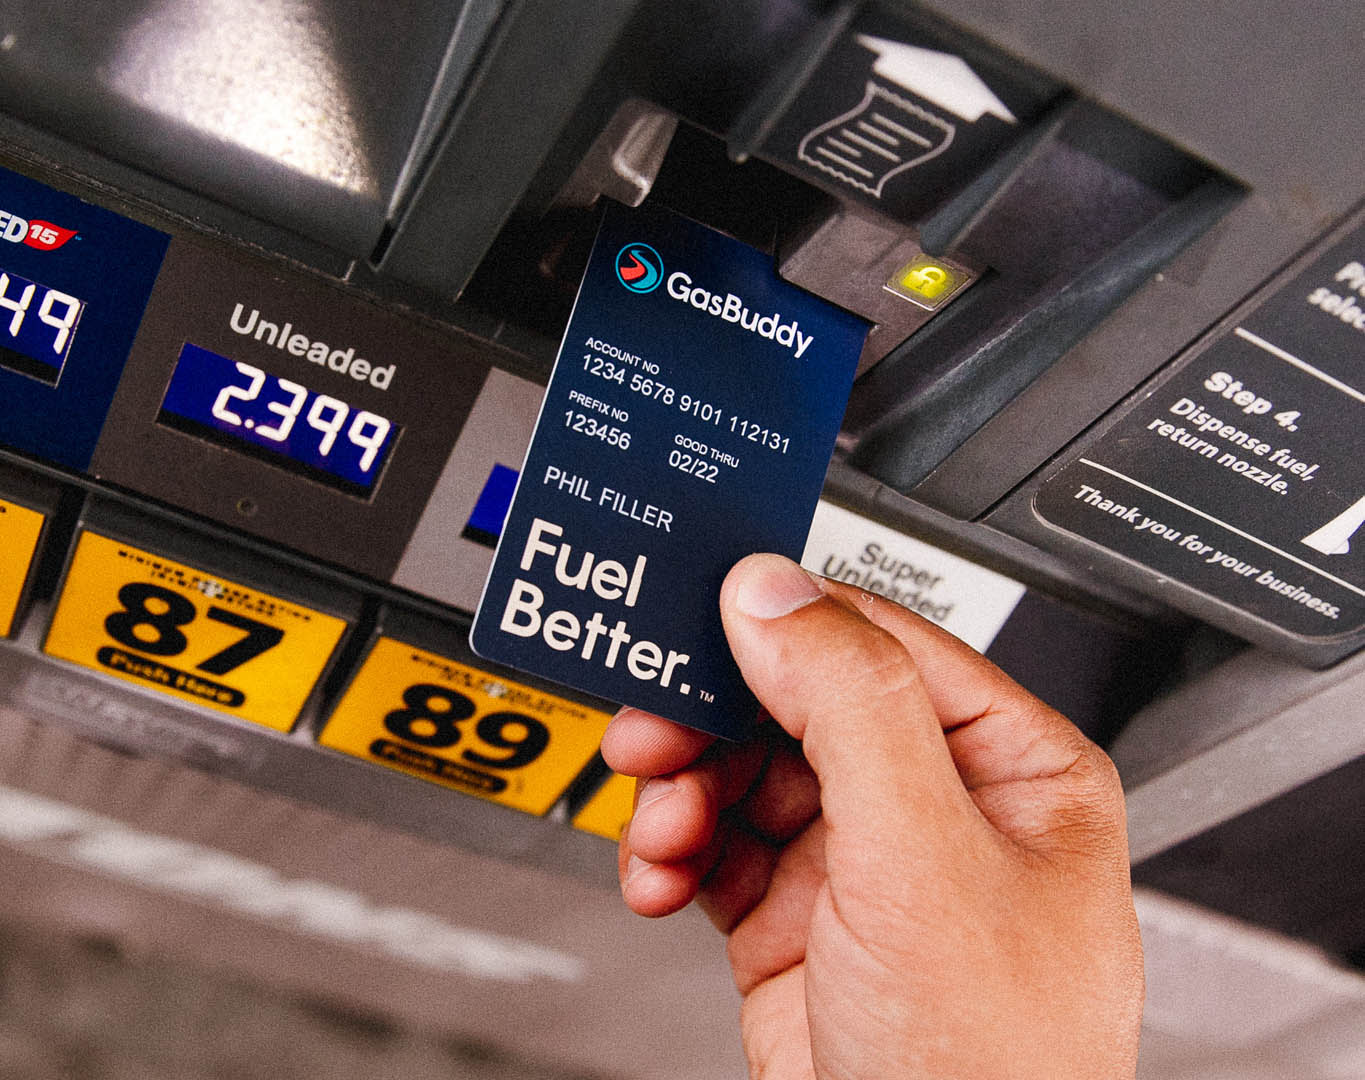 Pay with GasBuddy card